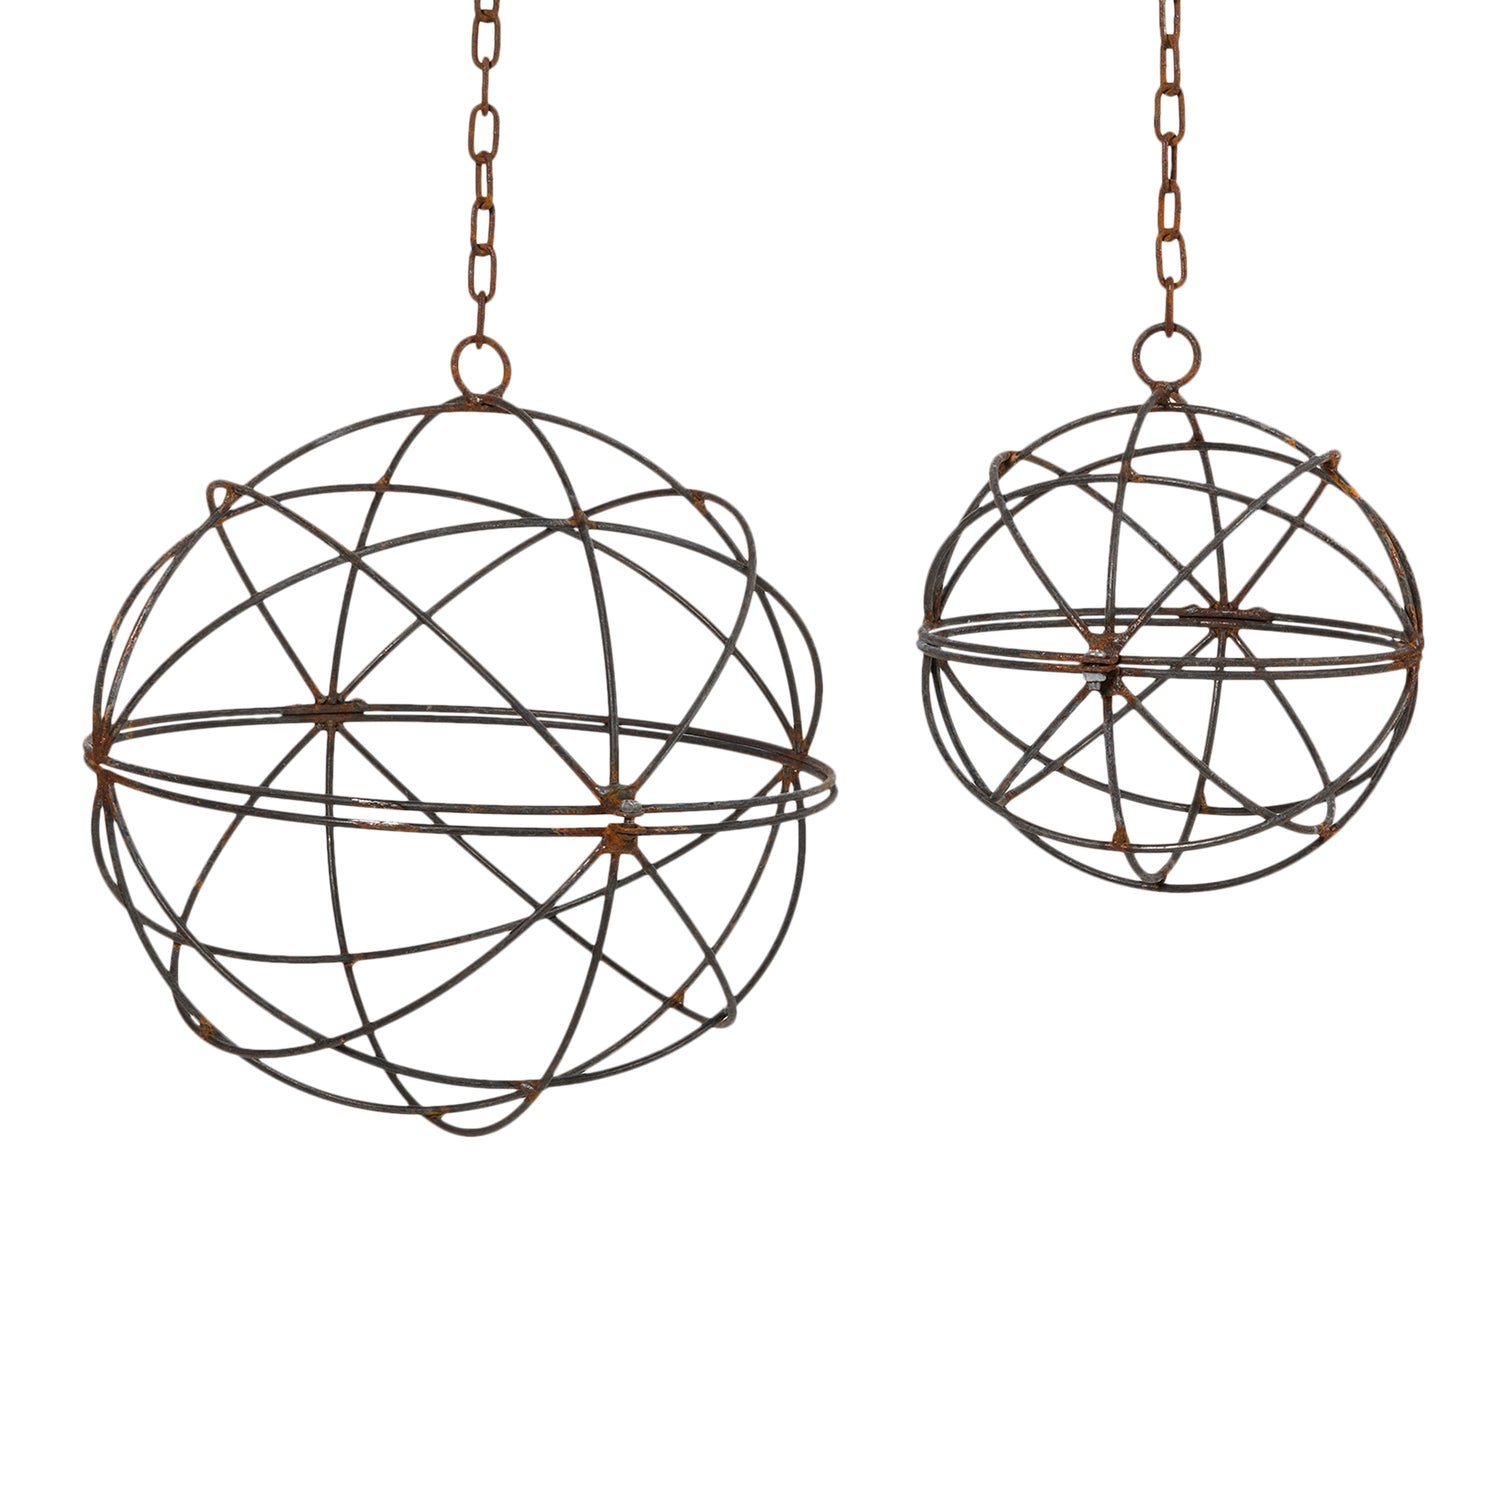 Wire Ball Hanging Planter